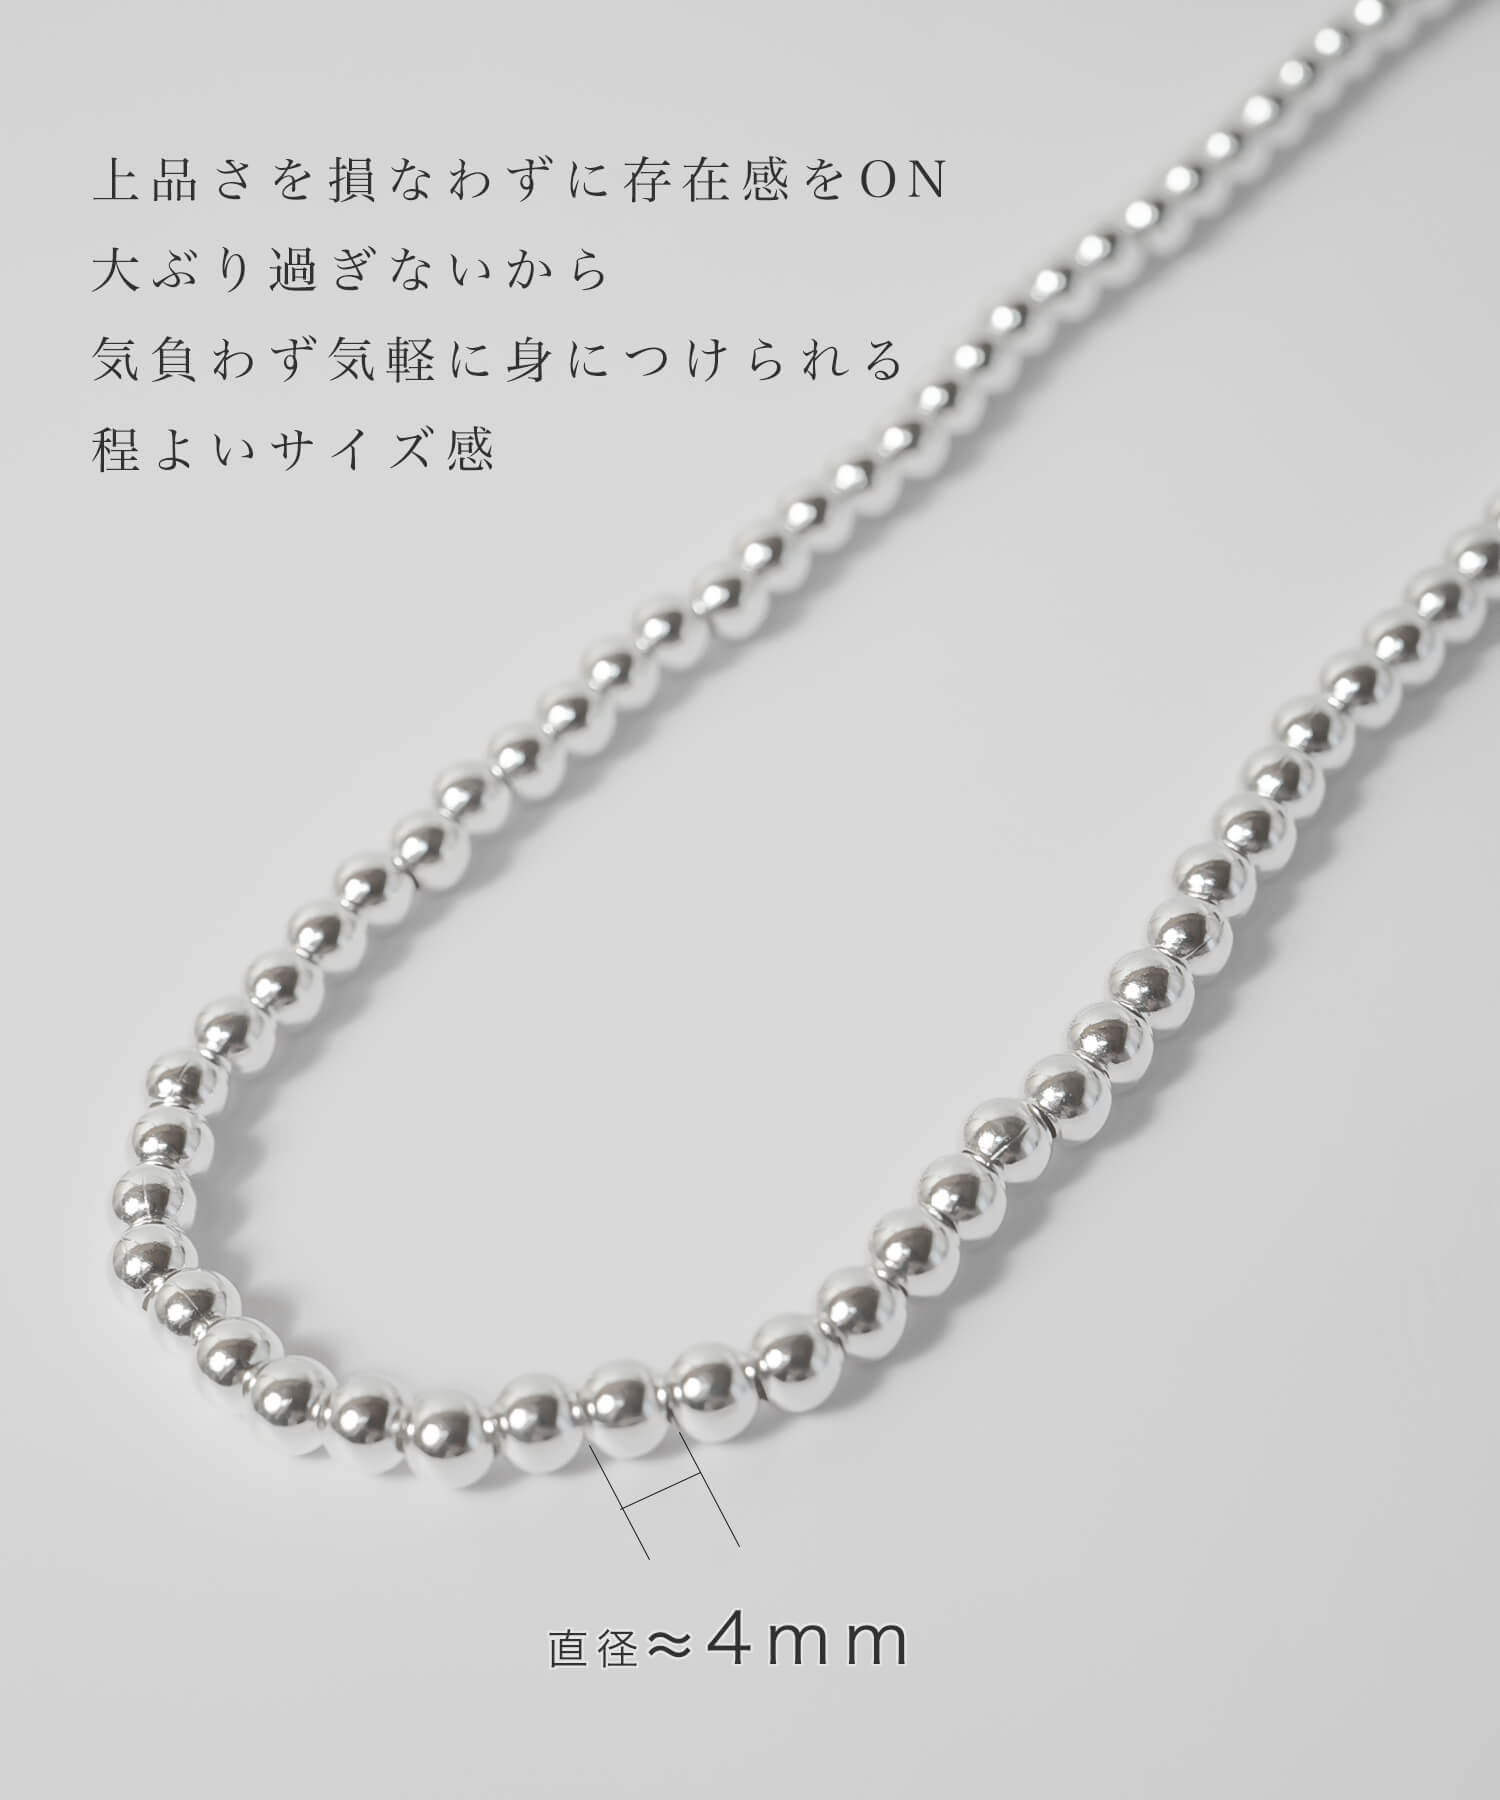 Silver925 Ball Chain Necklace -パルミラ ロング- | Ops.(オプス)公式